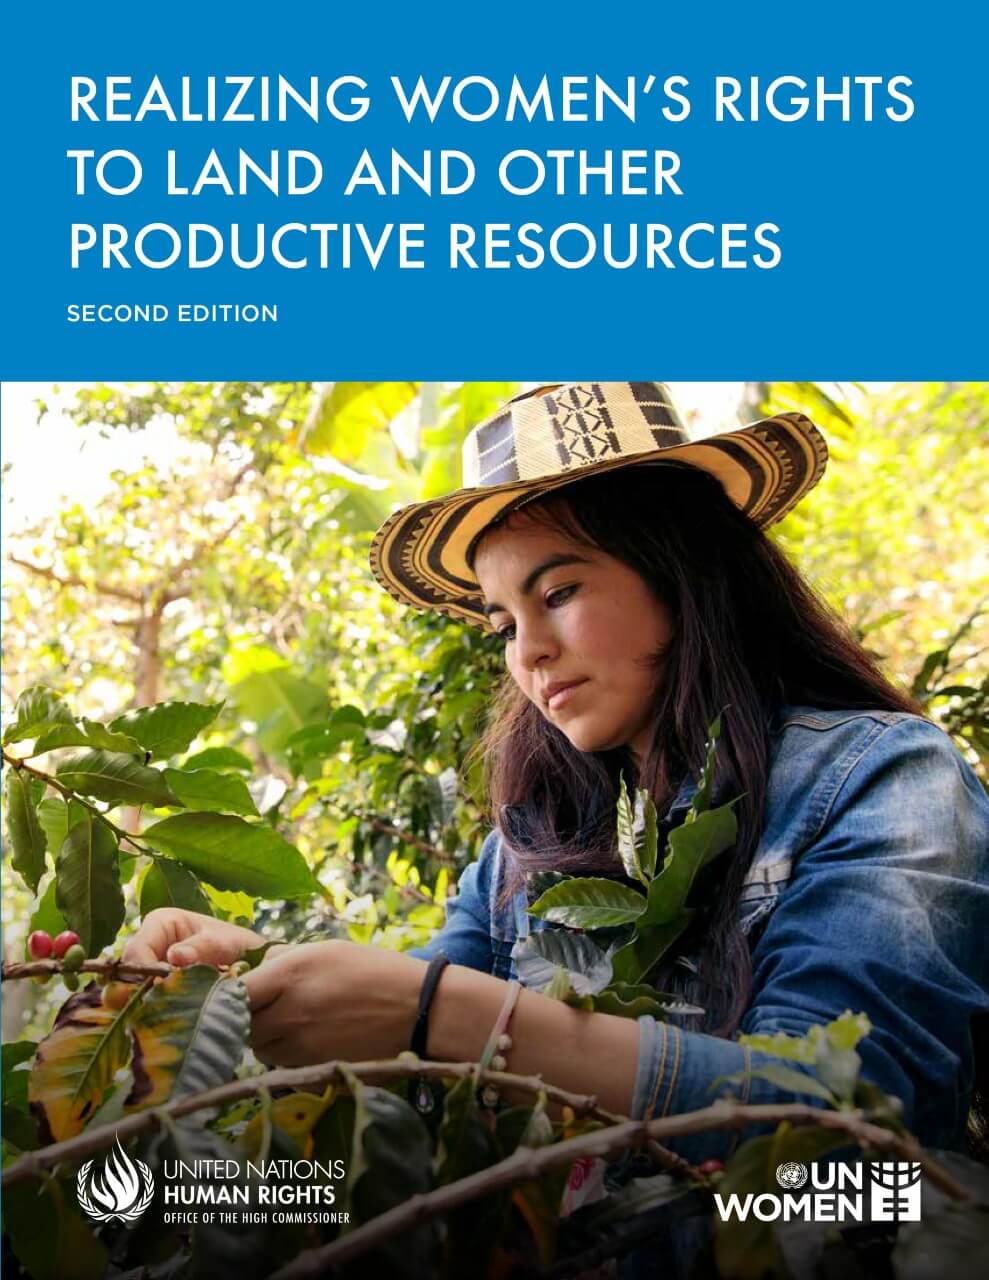 Realizing women’s rights to land and other productive resources (second edition)